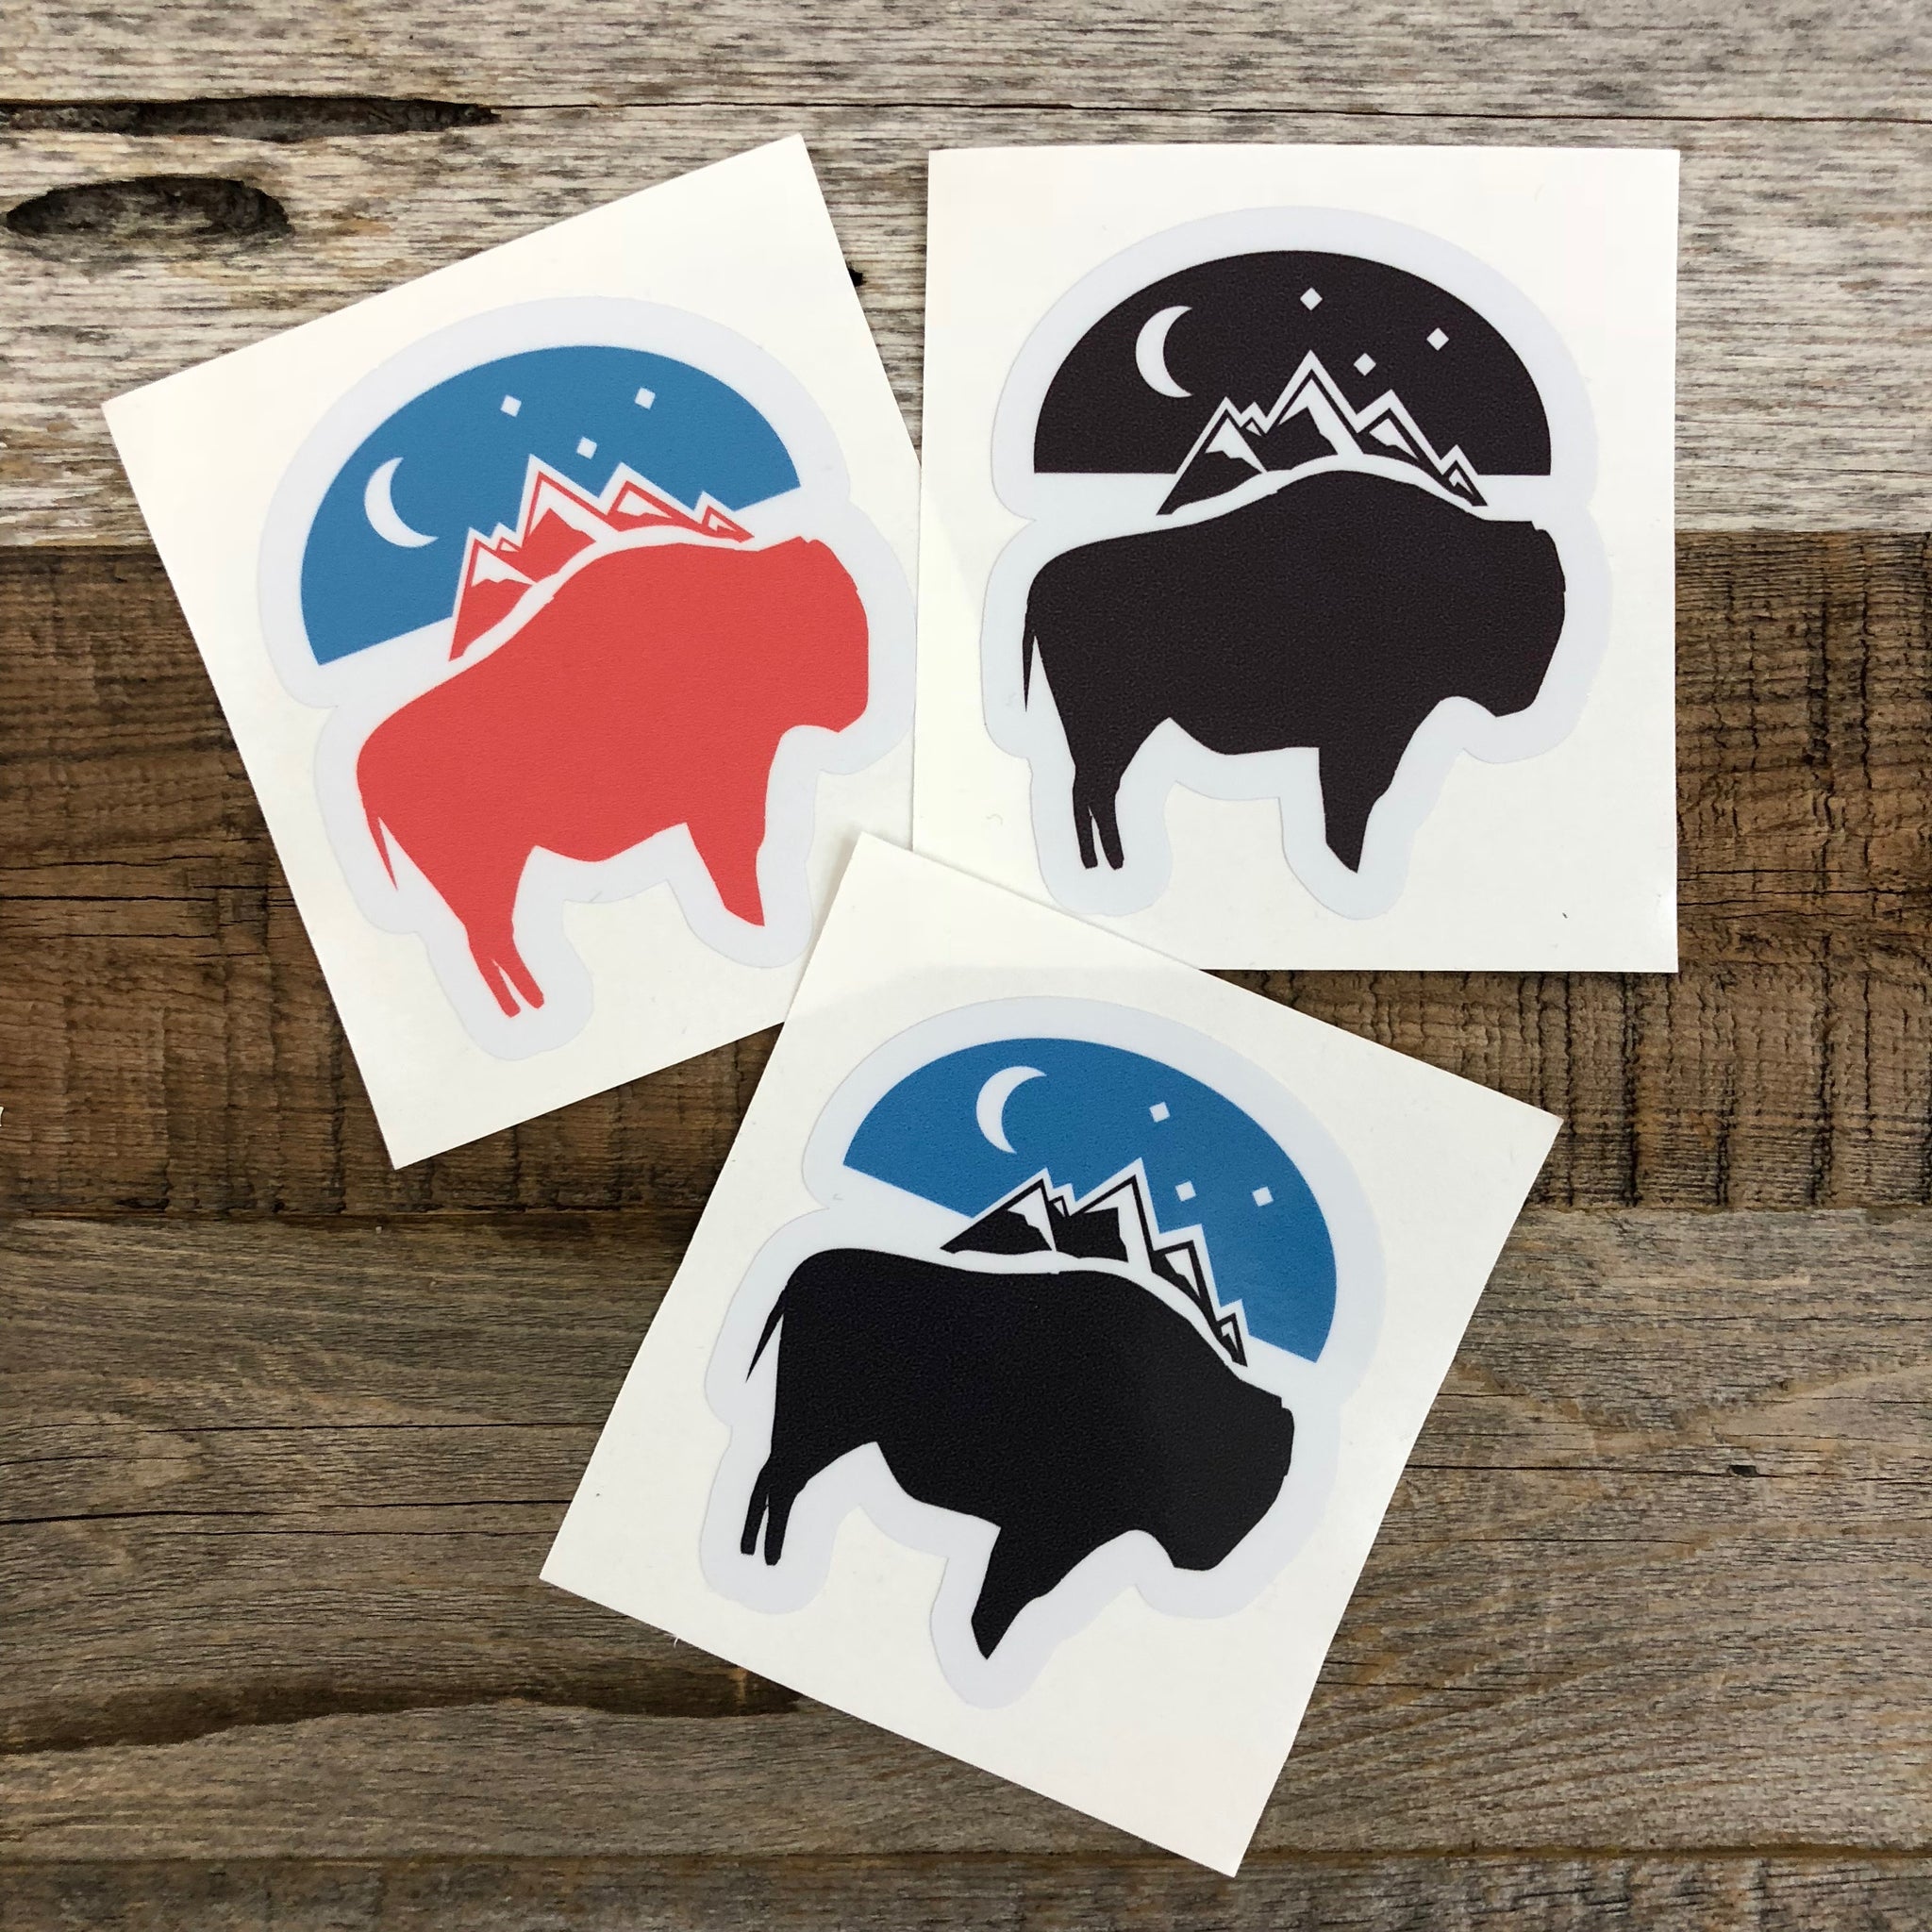 The New Bison Moon is a modern twist on our long time iconic design from WyoMade!   The Bison represents freedom and is a staple of Wyoming's open spaces. This sticker is sure to appease your desire to roam free.  Be a part of the herd with the Bison Moon design from Wyomade.        Size:  3.5 "